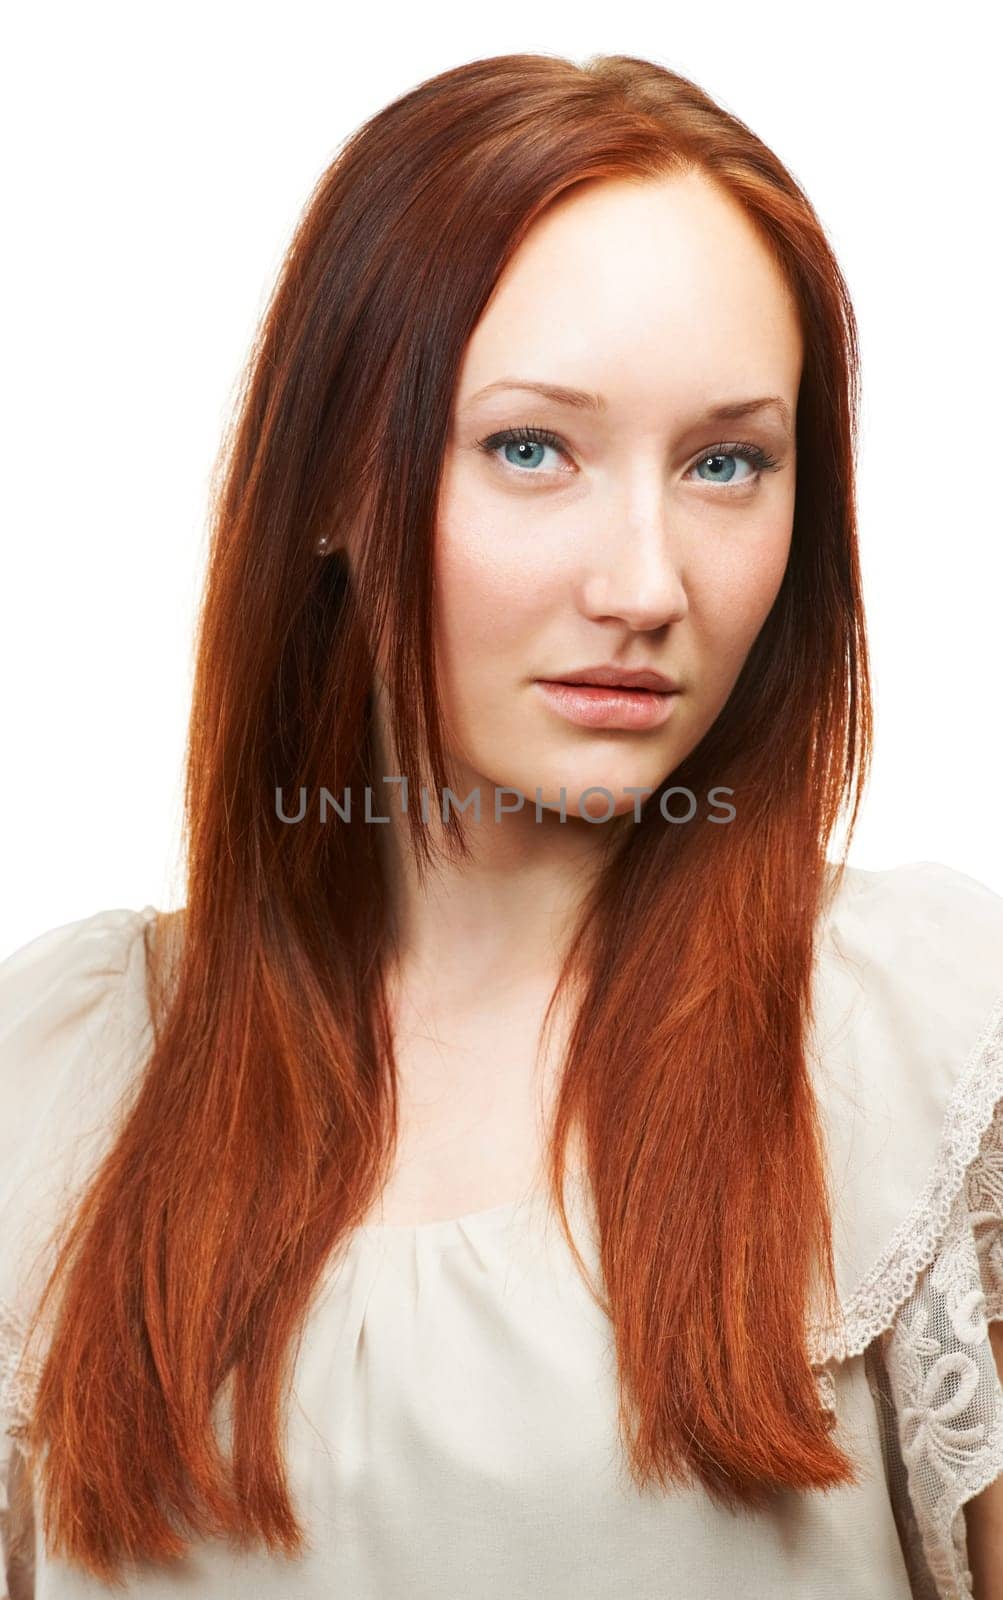 Hair care, ginger or portrait of natural woman with beauty in white background for a shine. Face, redhead model and person in studio with healthy glow, texture or hairstyle results for confidence by YuriArcurs